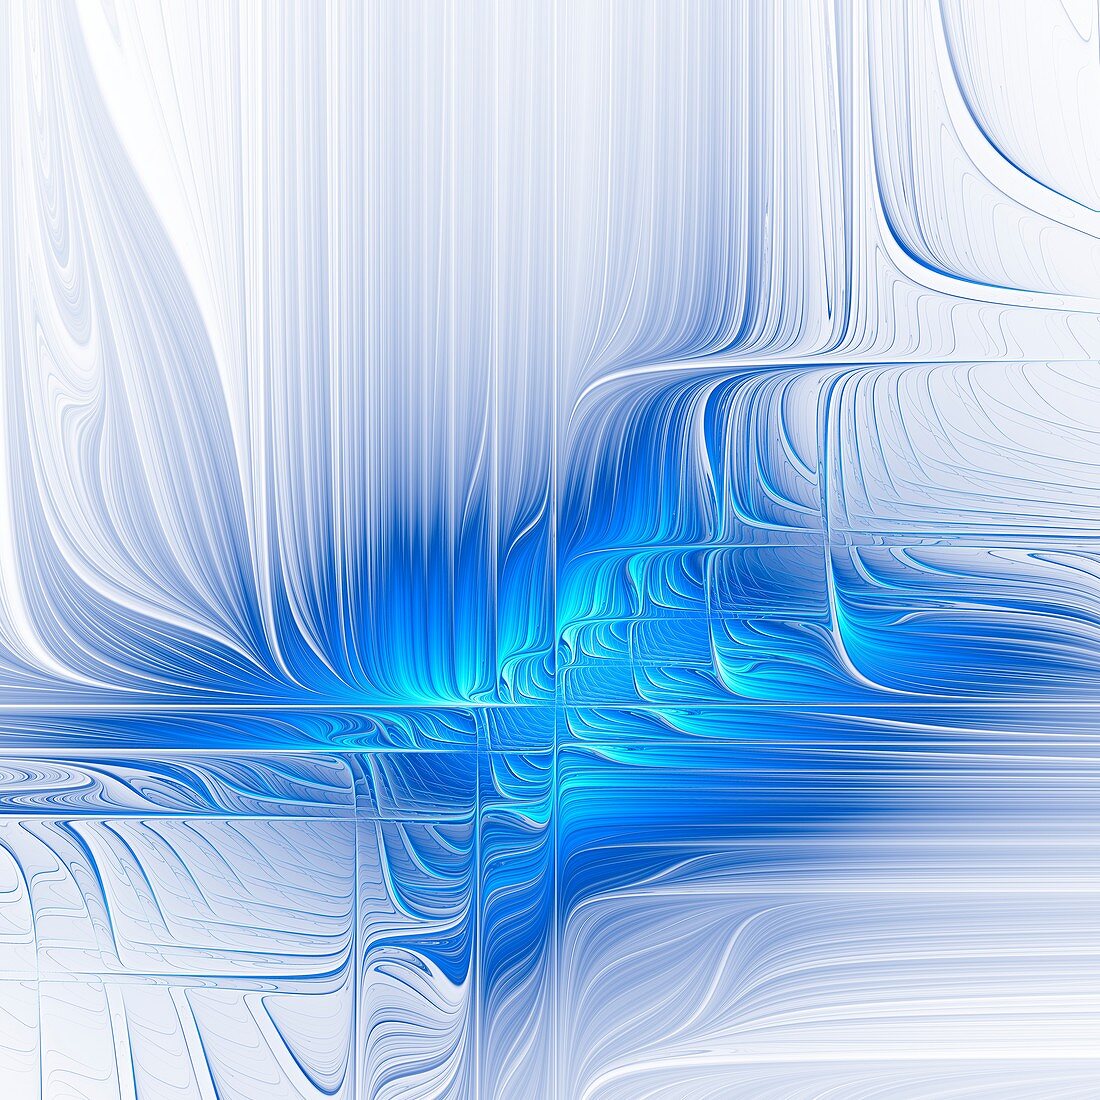 Fractal abstract of blue and white lines.